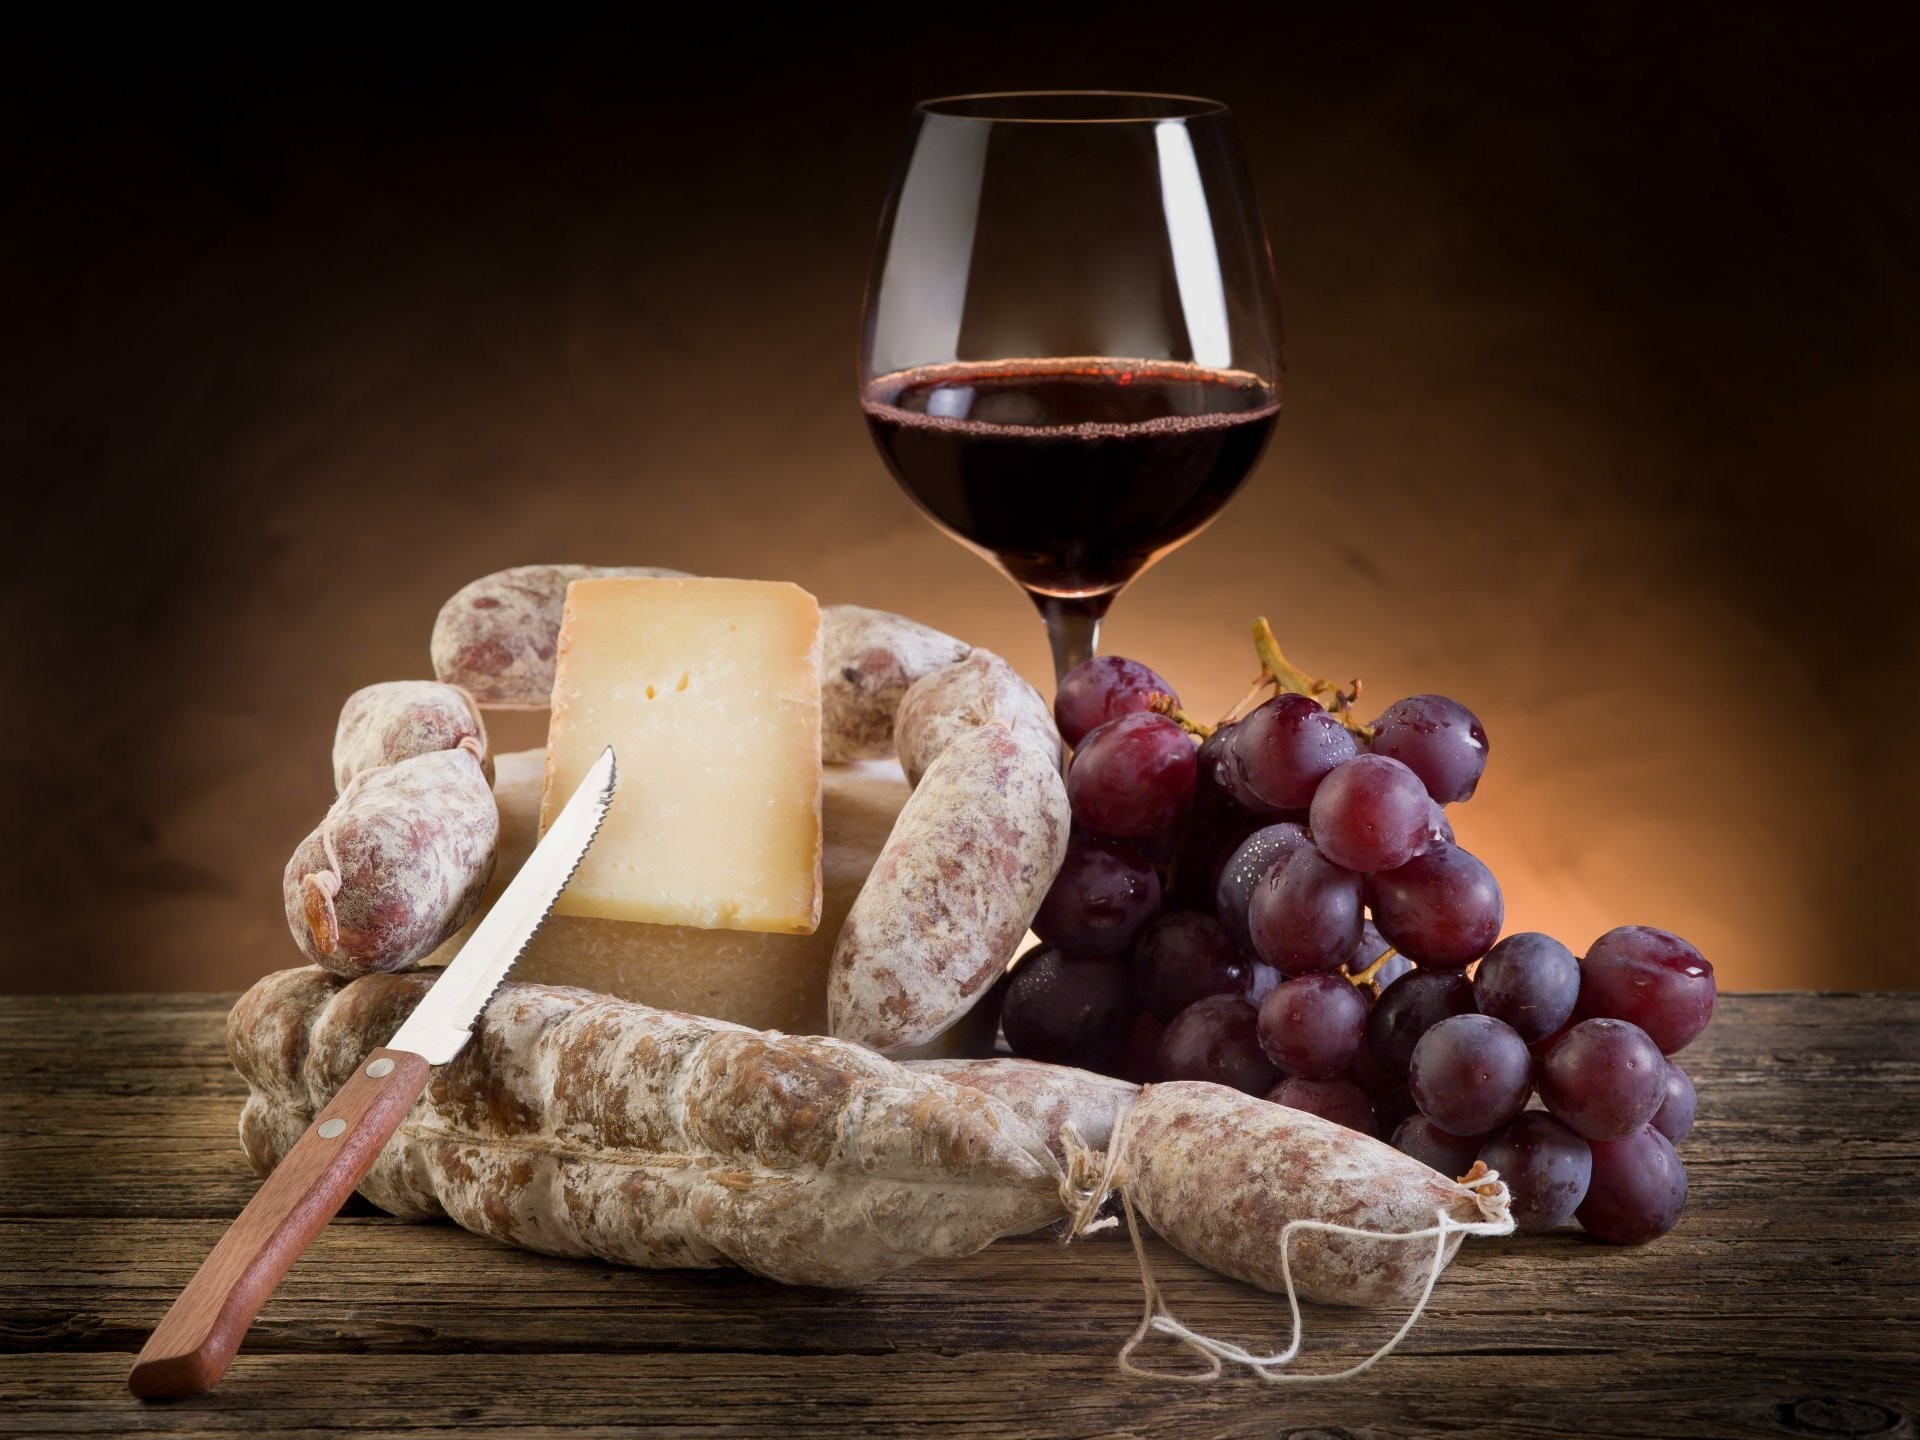 1920x1440 glass wine red grapes bunch of cheese hunk knife salami